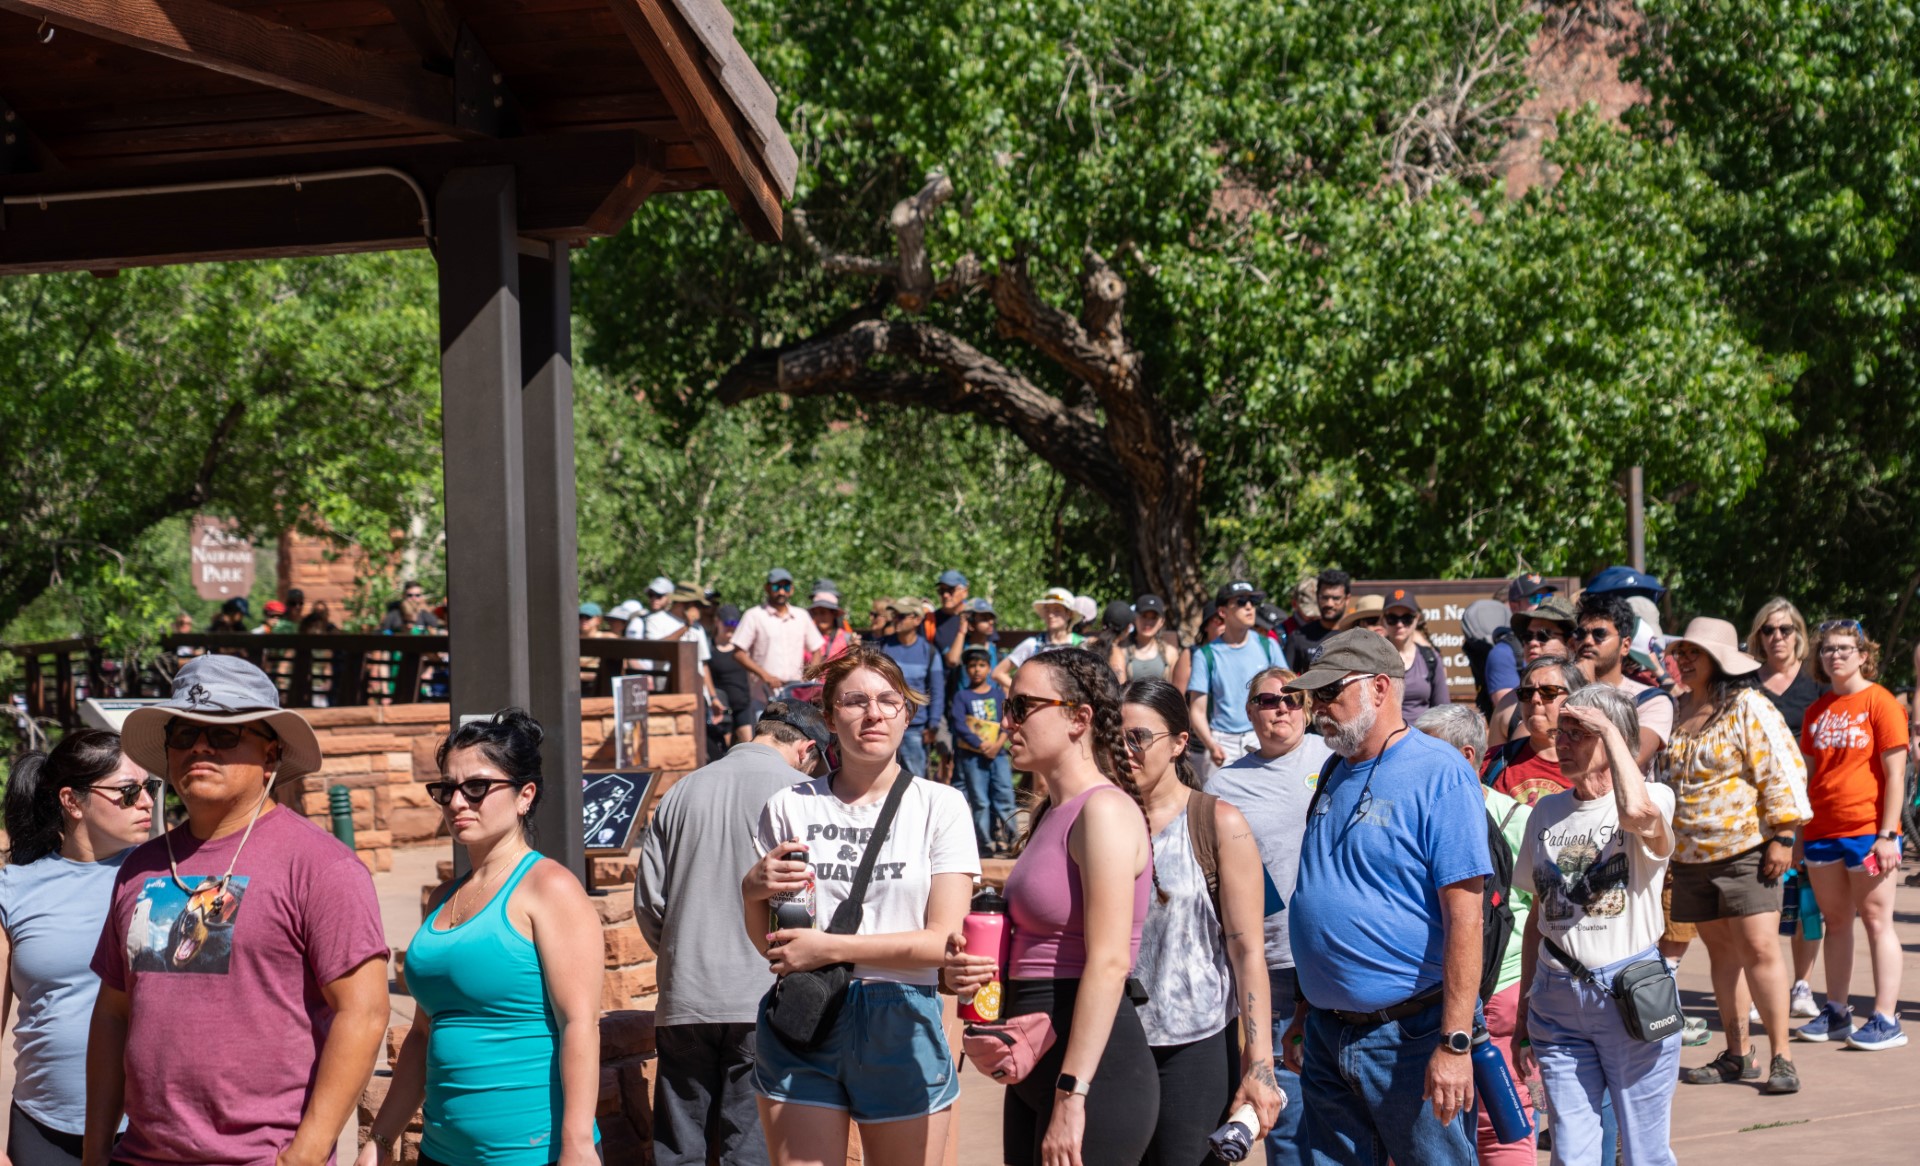 Long lines and heavy traffic are expected at Zion National Park this summer as they prepare for the...